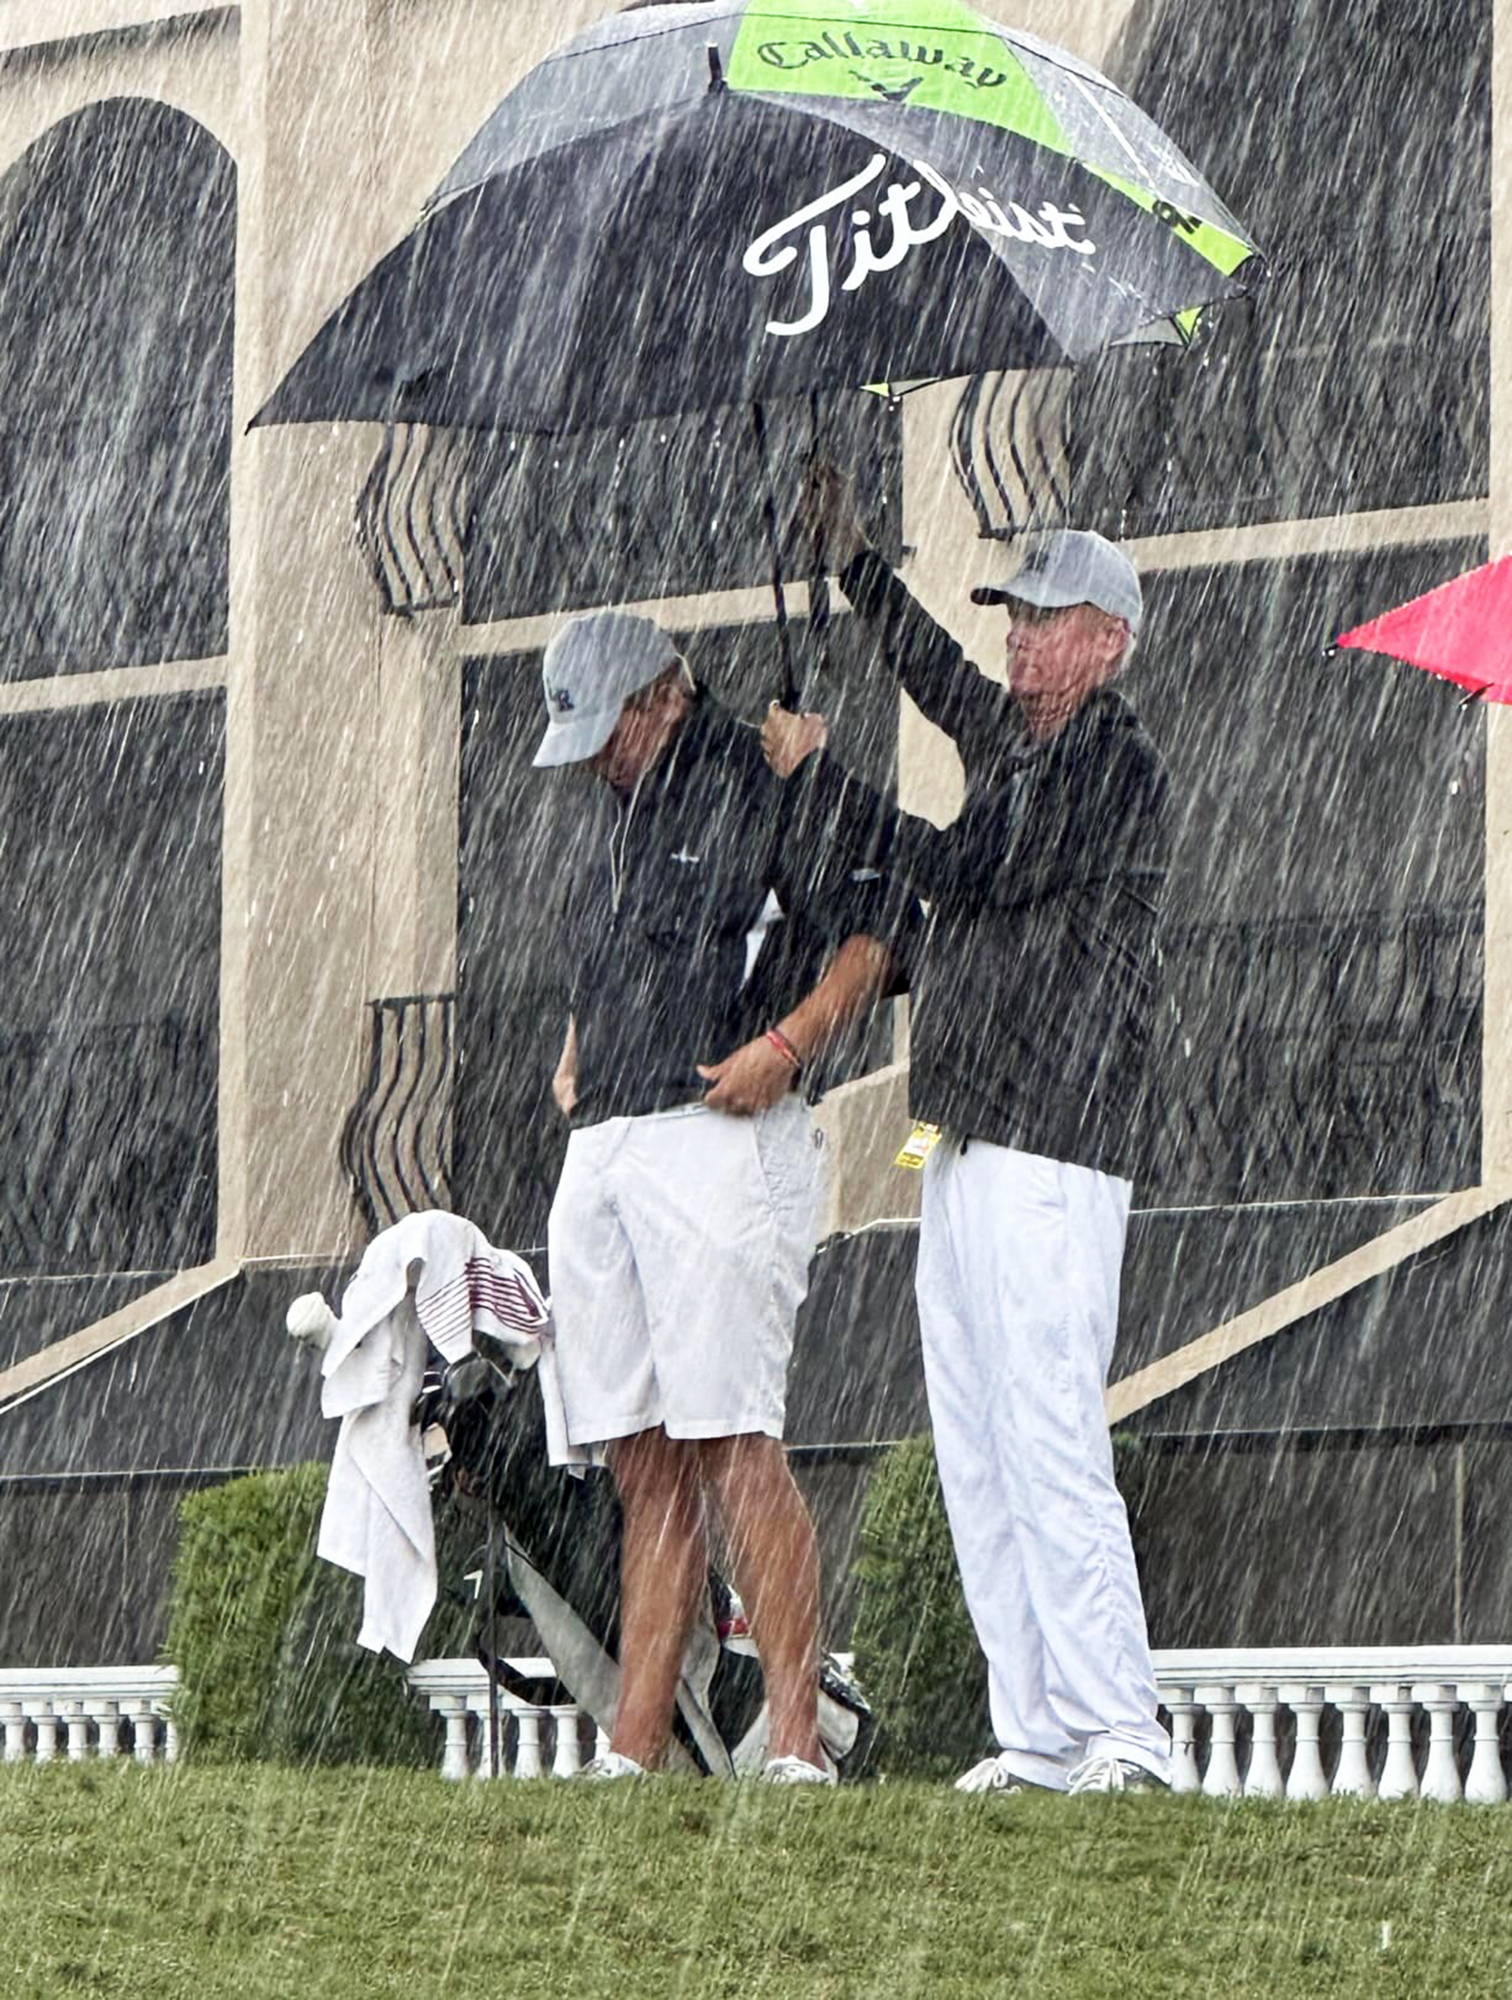 Lakewood Ranch sophomore Henry Burbee thinks about his next shot at the FHSAA state tournament while Coach Dave Frantz holds an umbrella above his head. The tournament was shortened to one round because of rain. (Courtesy photo.)